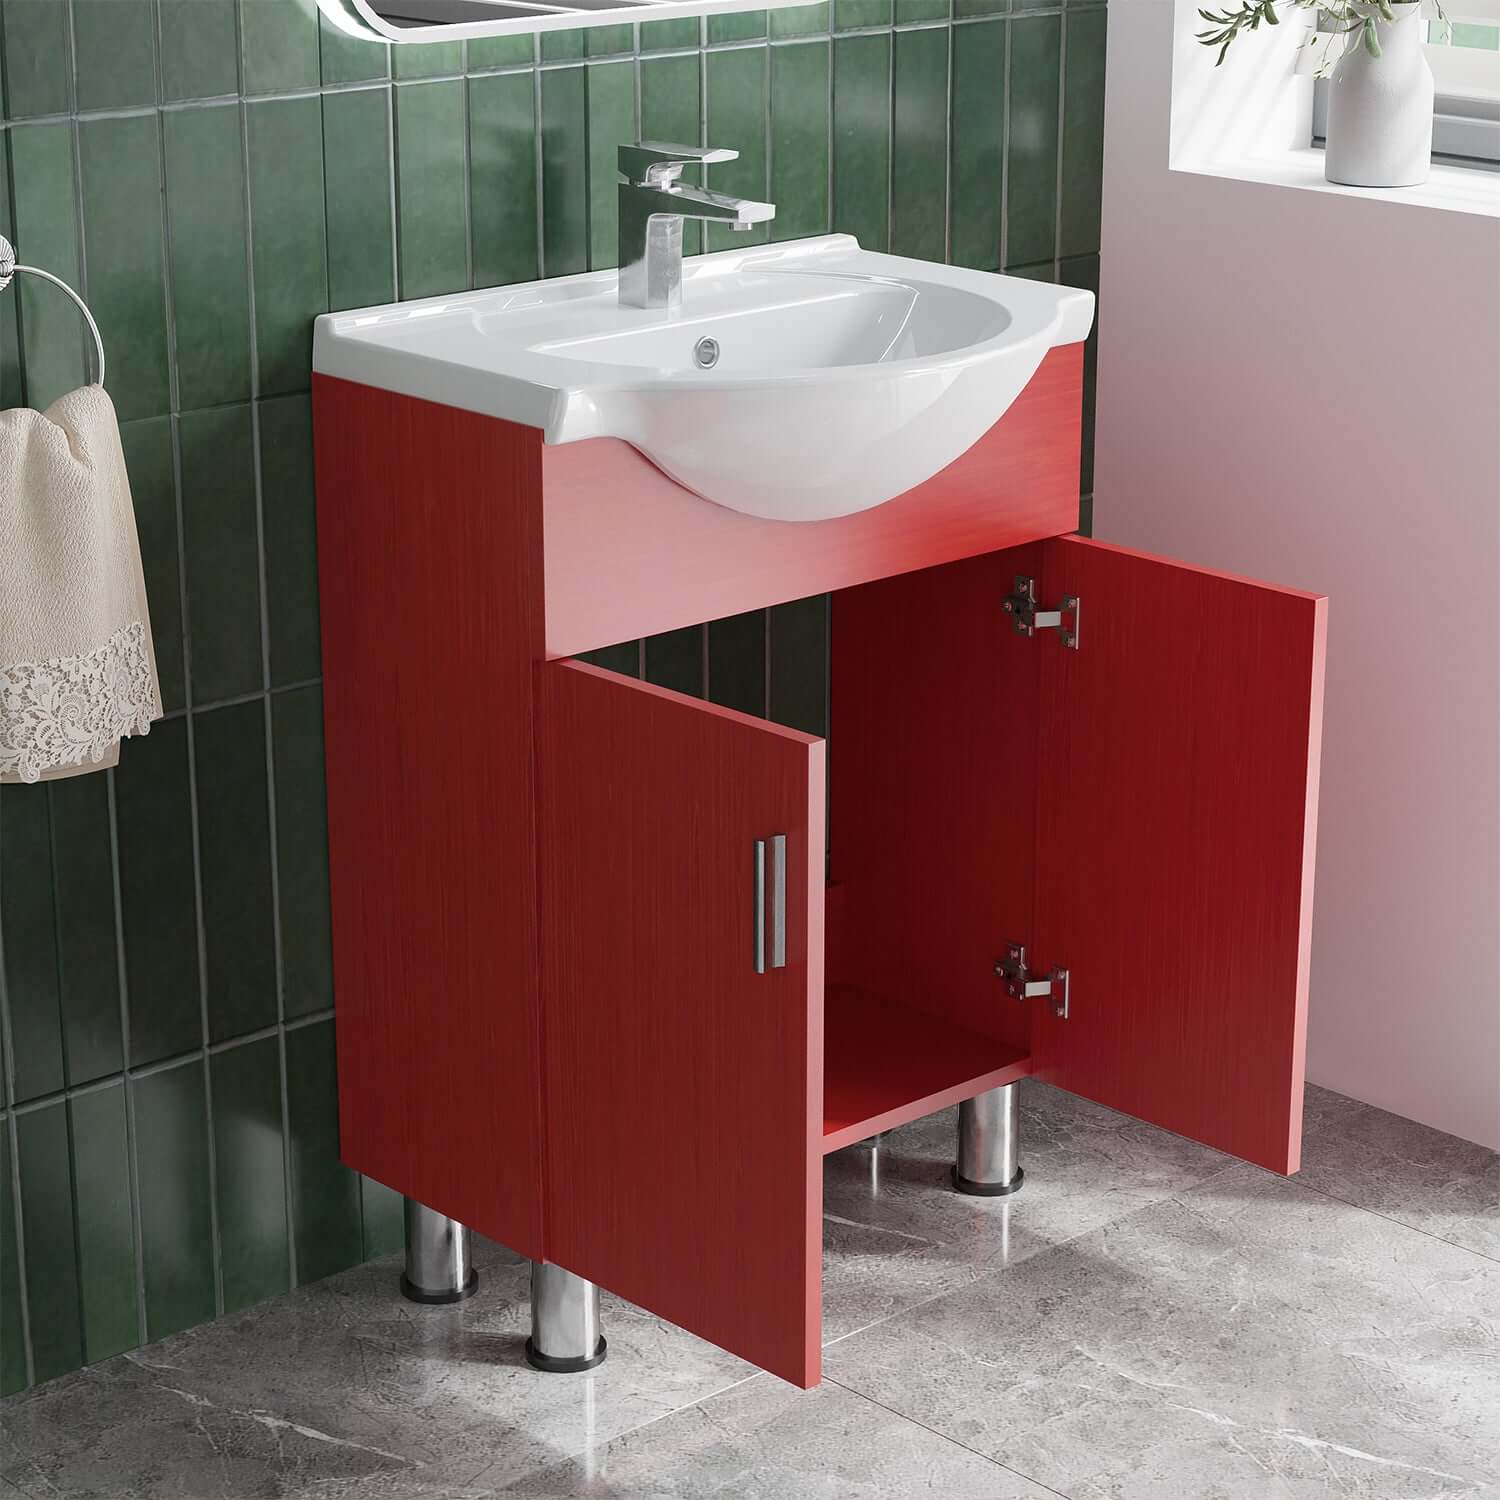 Lilly 24" W x 18" D x 34" H Euro-Style Vanity in Red with Ceramic Vanity Top in White - Dreamwerks